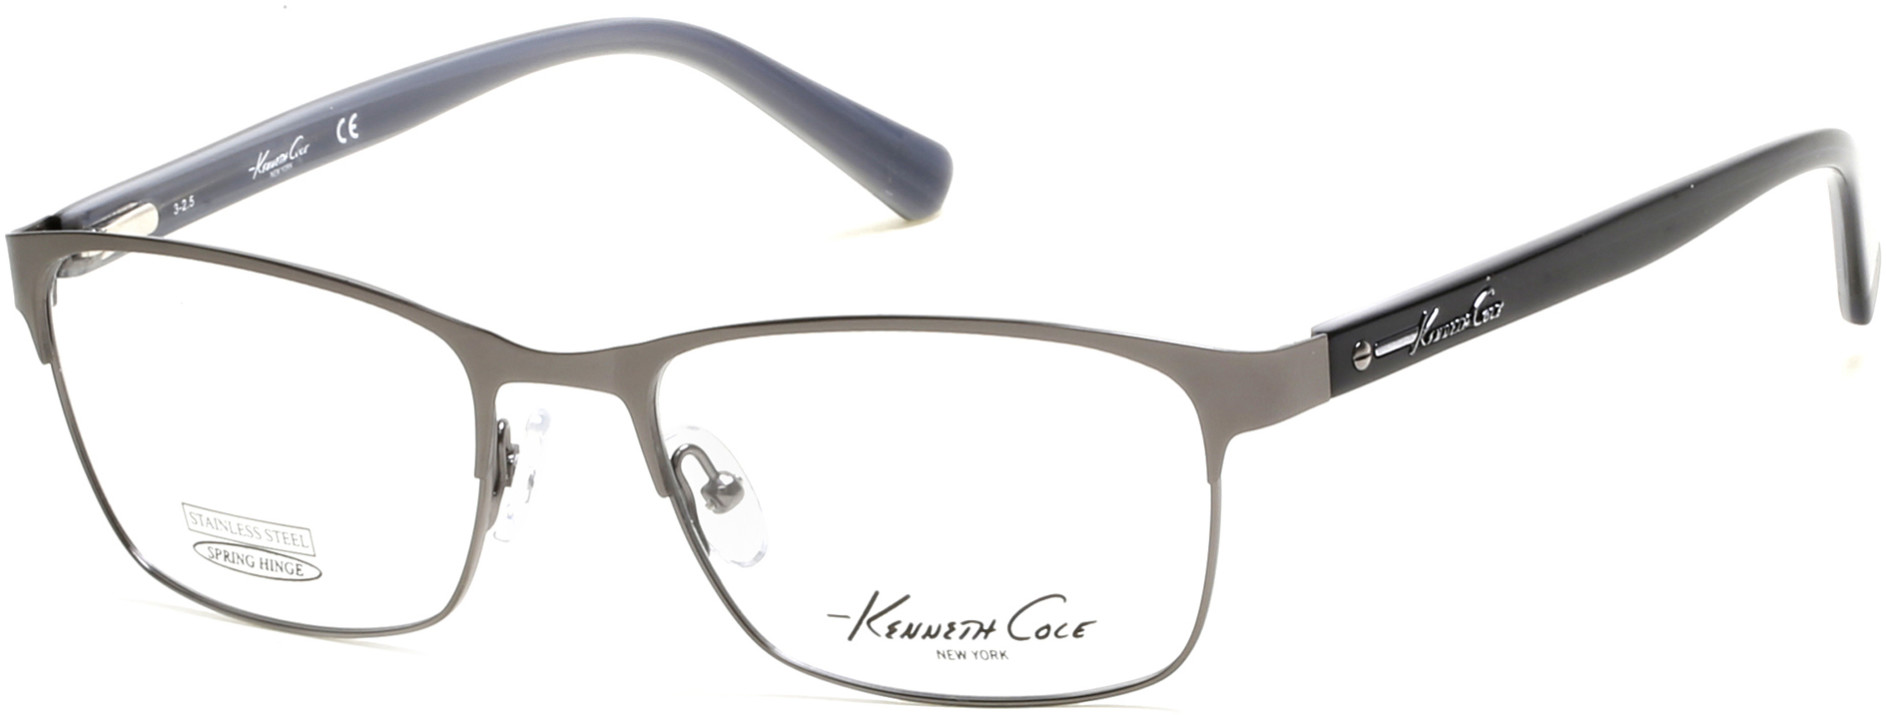 KENNETH COLE NY 0248 009